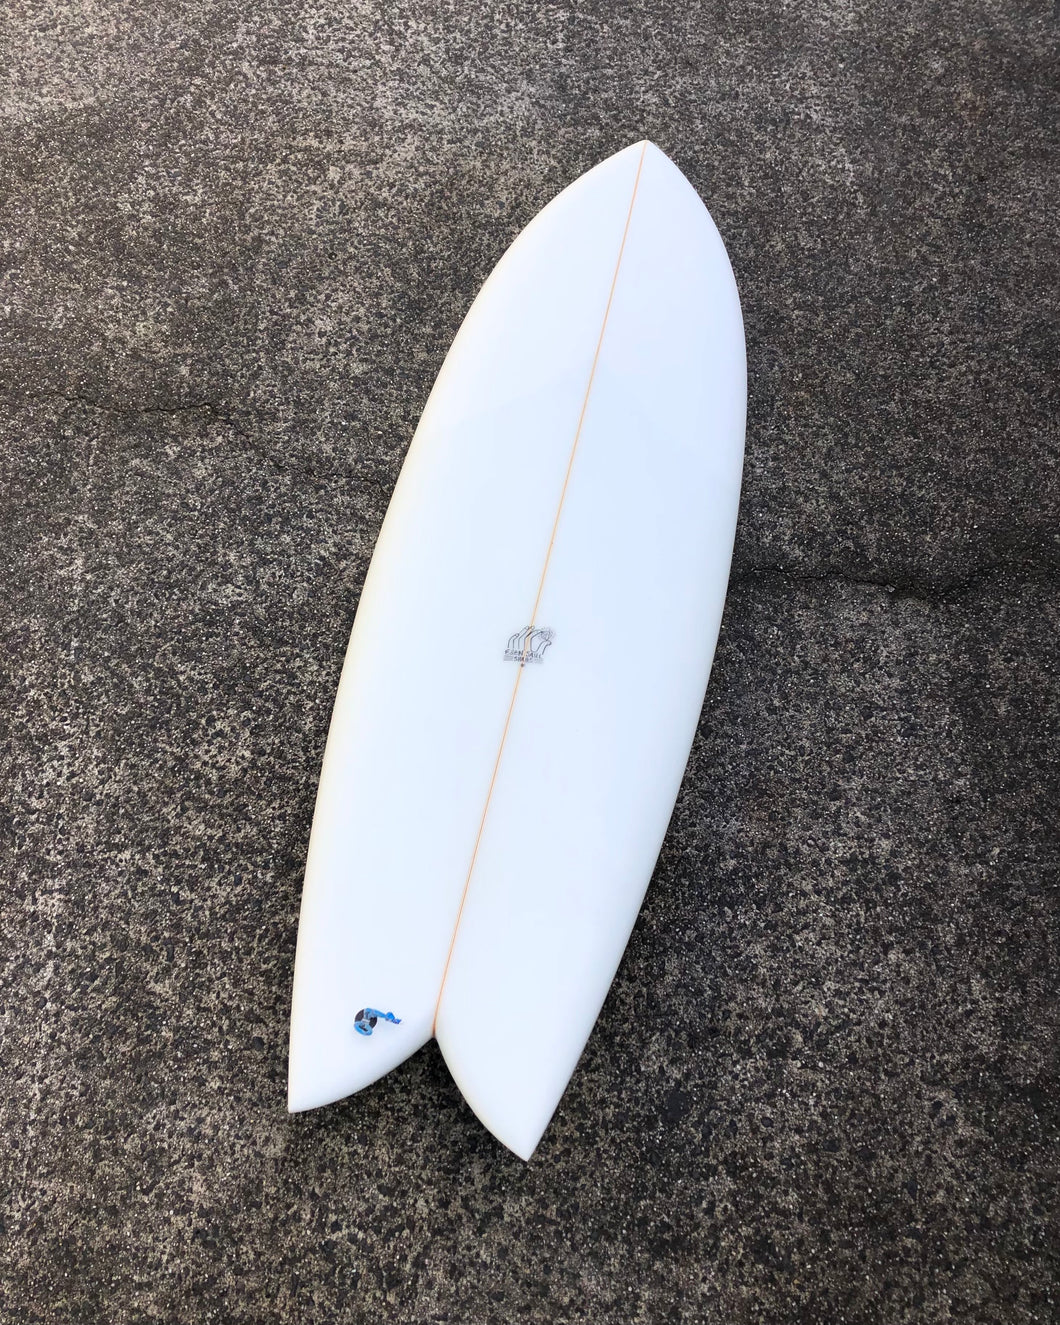 Riches RF - 5'7 Clear - USED